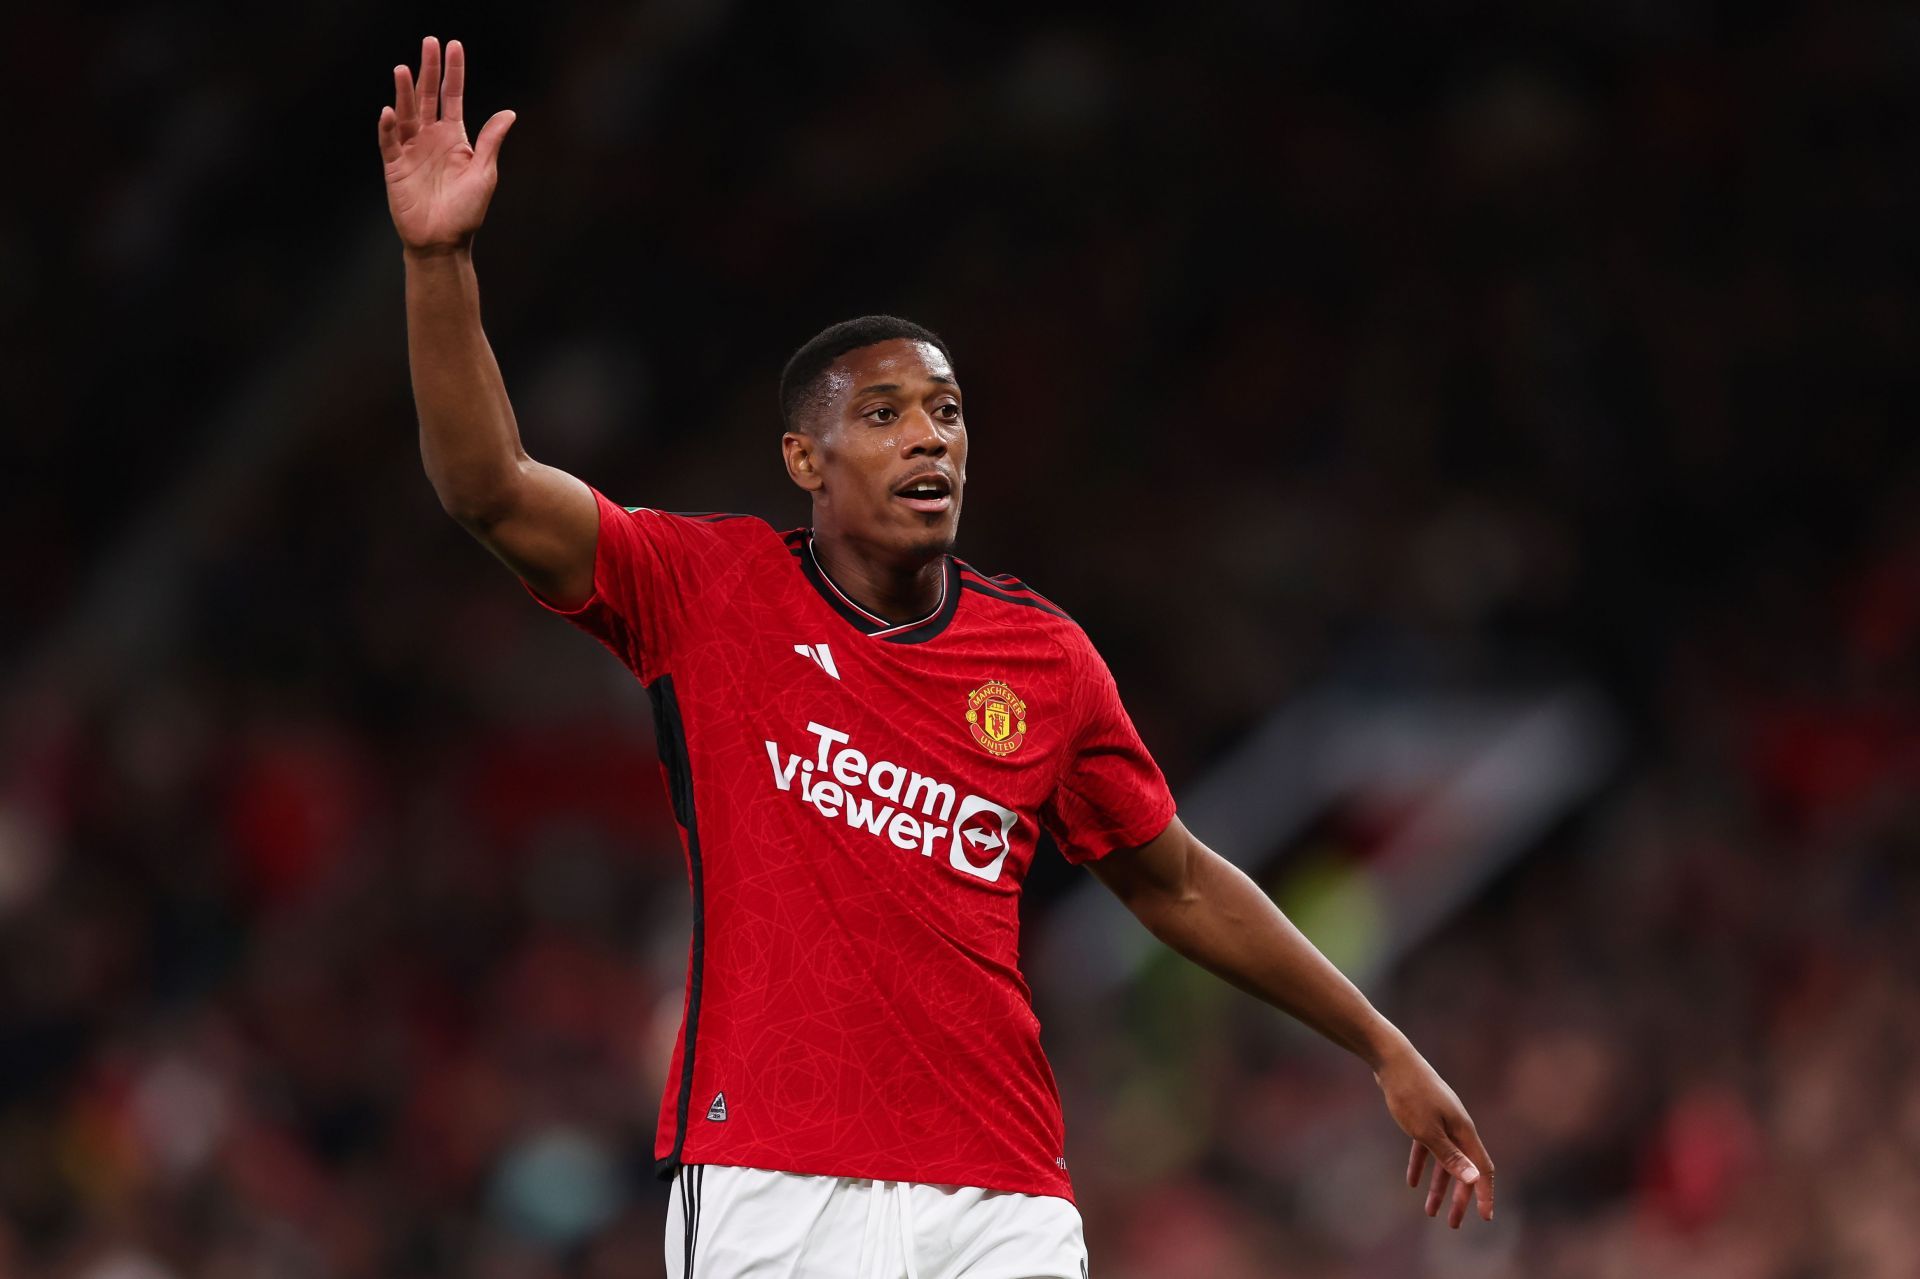 Martial in action for Manchester United v Crystal Palace - Carabao Cup Third Round